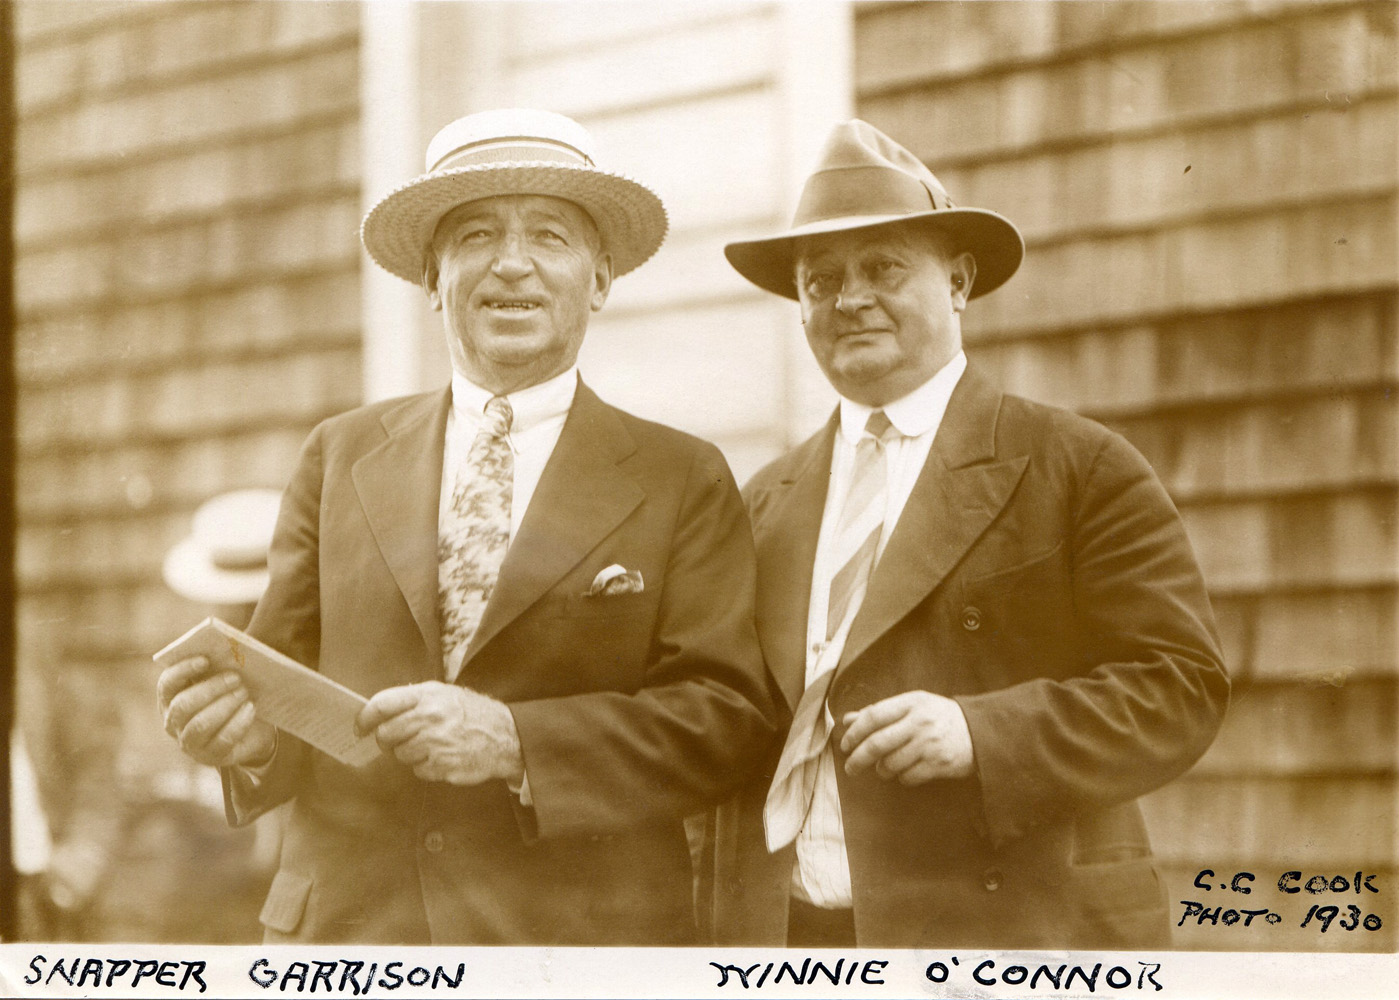 Hall of Fame jockeys Snapper Garrison and Winnie O'Connor in 1930 (C. C. Cook/Museum Collection)